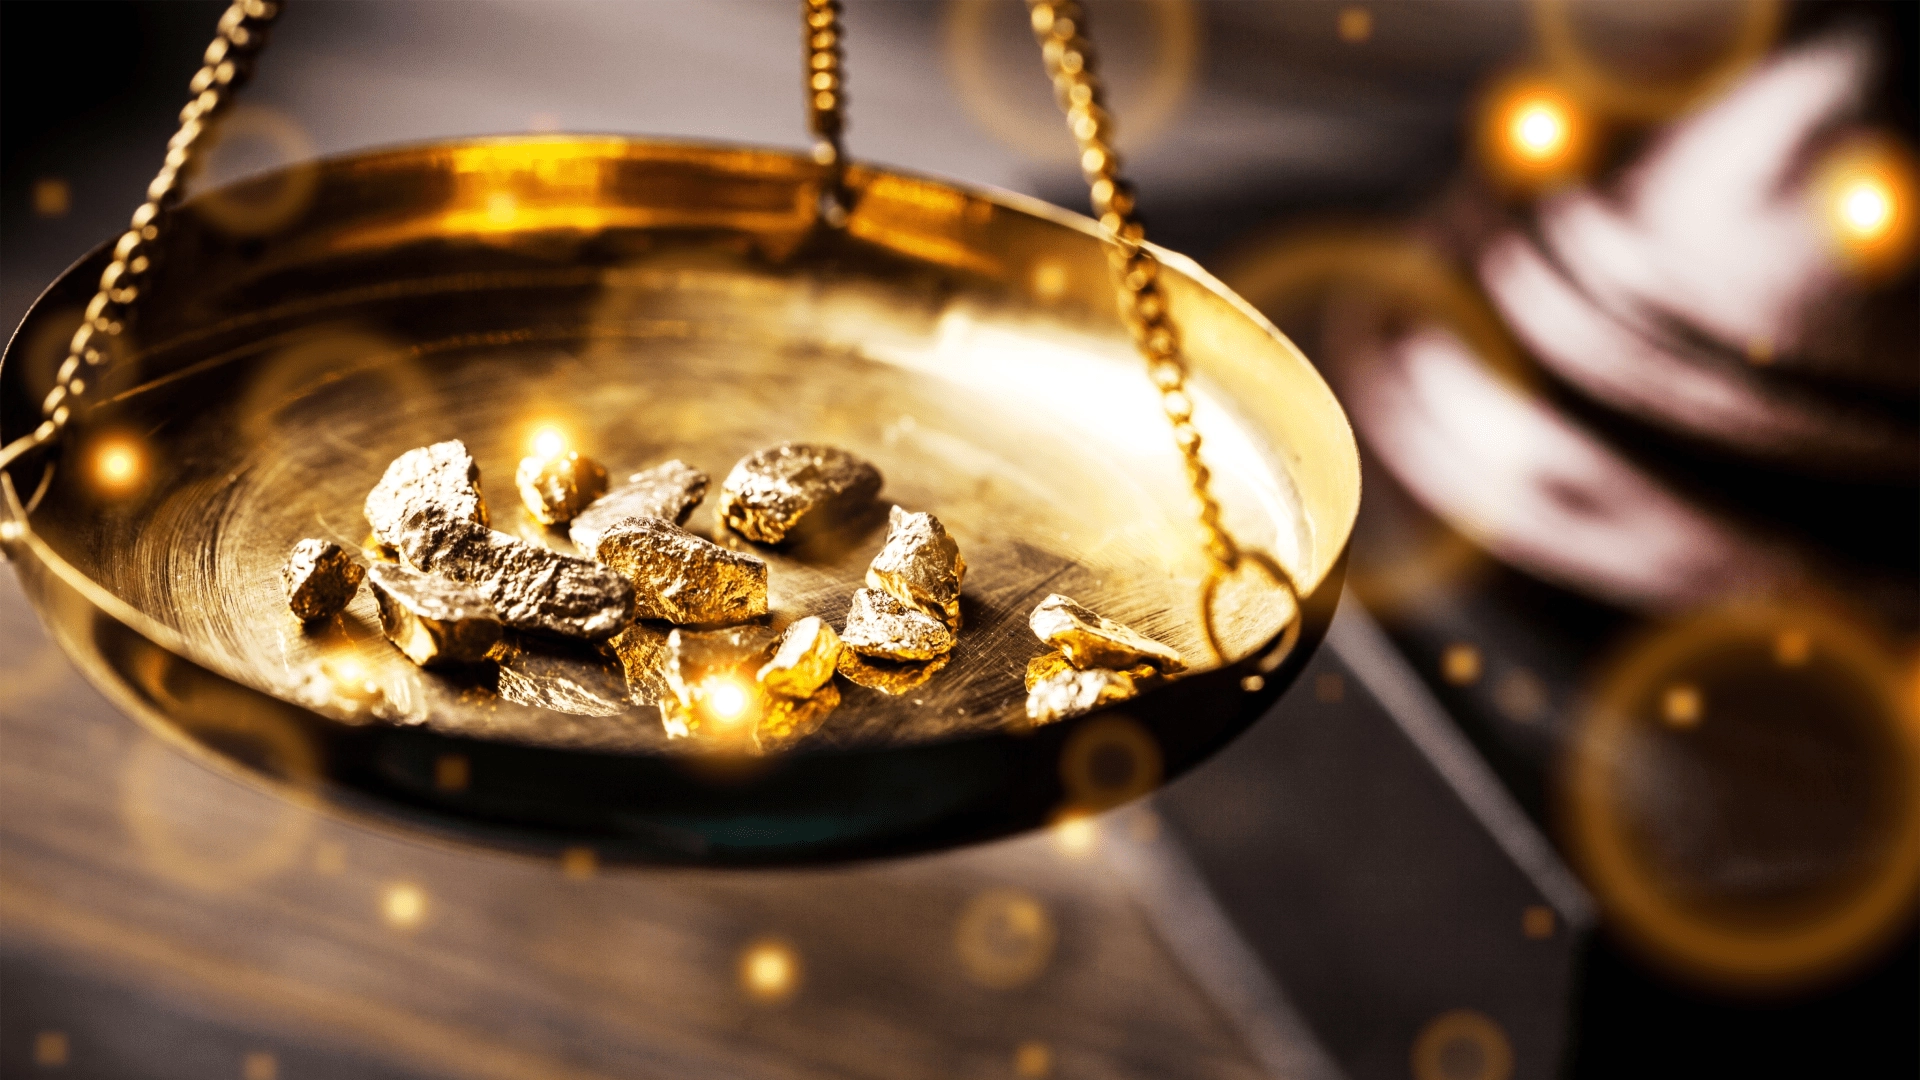 gold on the weighing scale, representing gold prices and mass